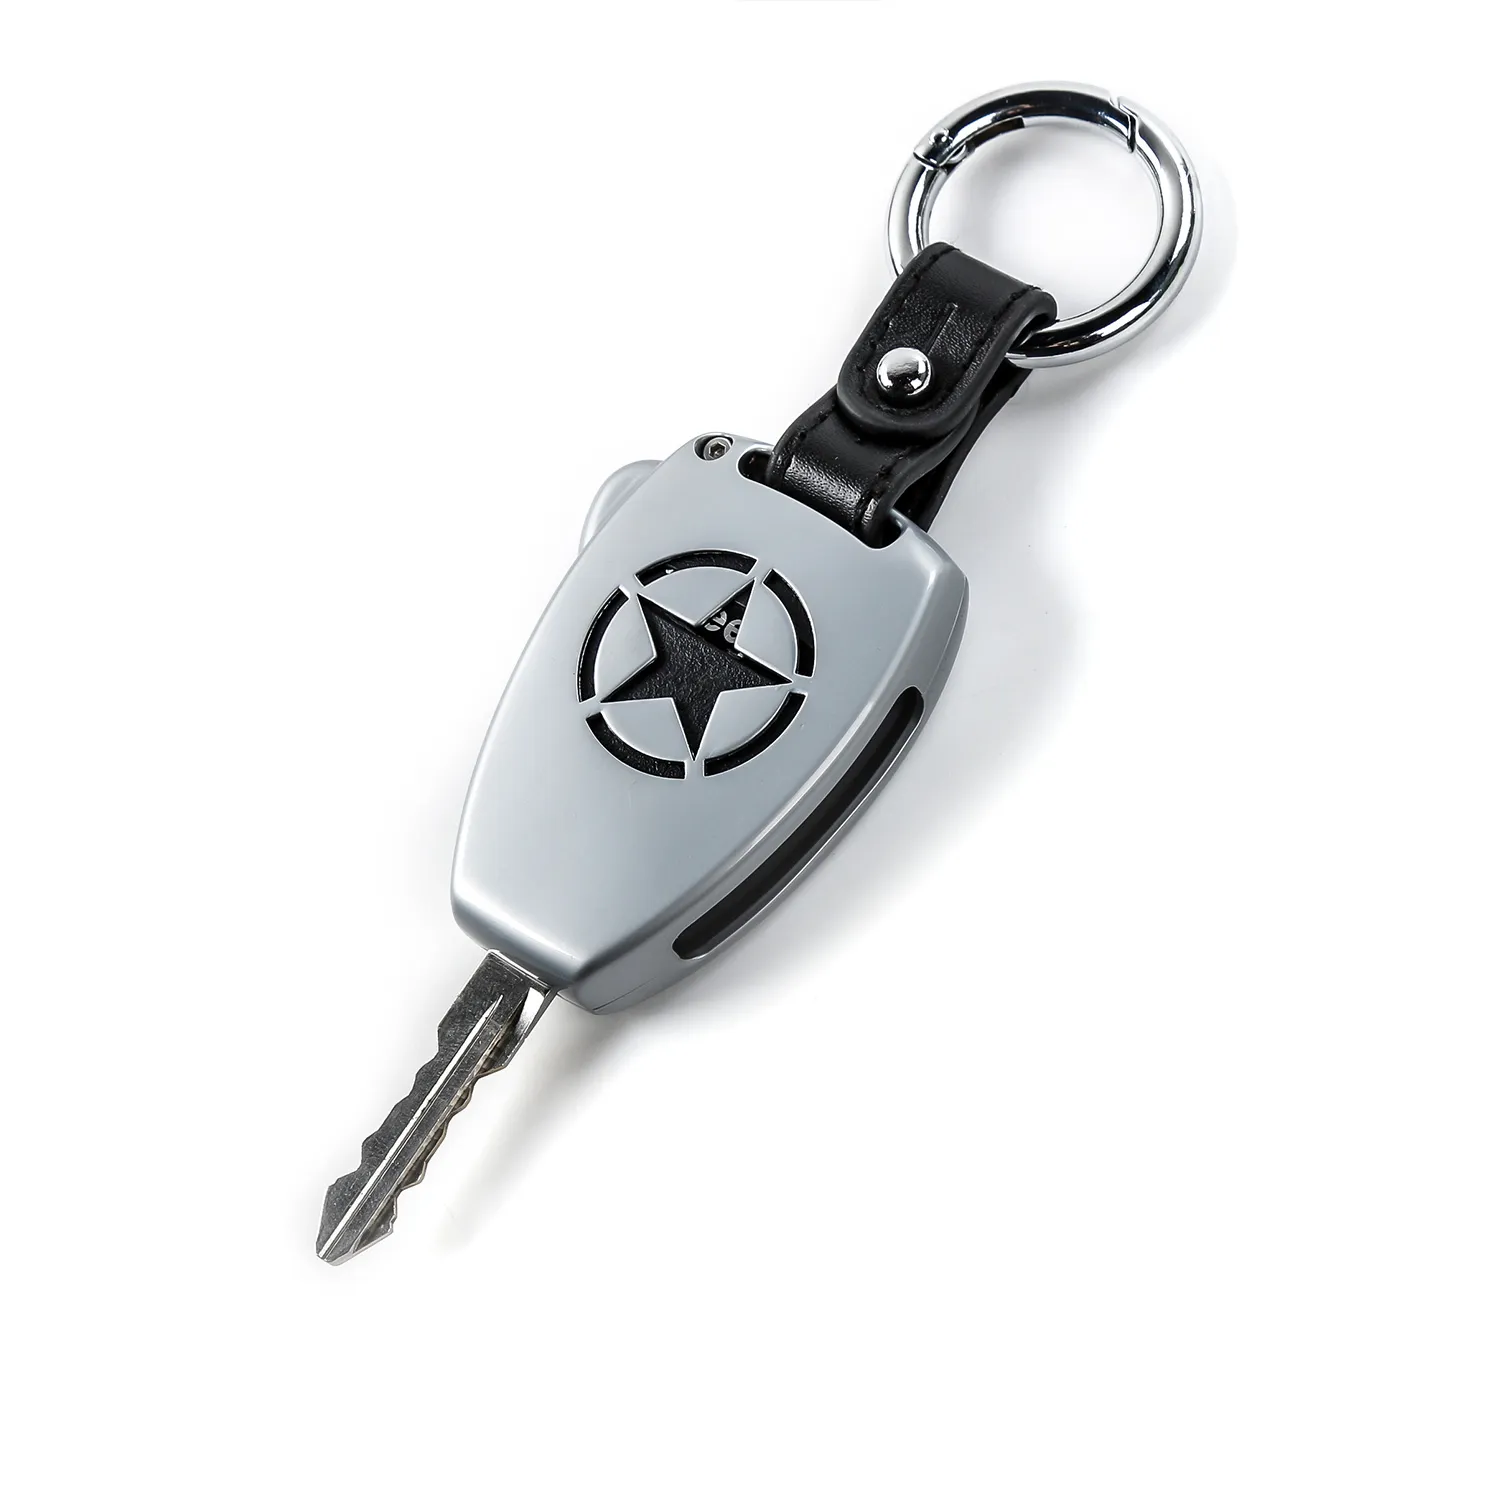 Jeep Wrangler JK 08 17 Lightest Metal Key Fob Cover With Key Chain Ultimate  Protection For Your Car From Szzt20170724, $28.25